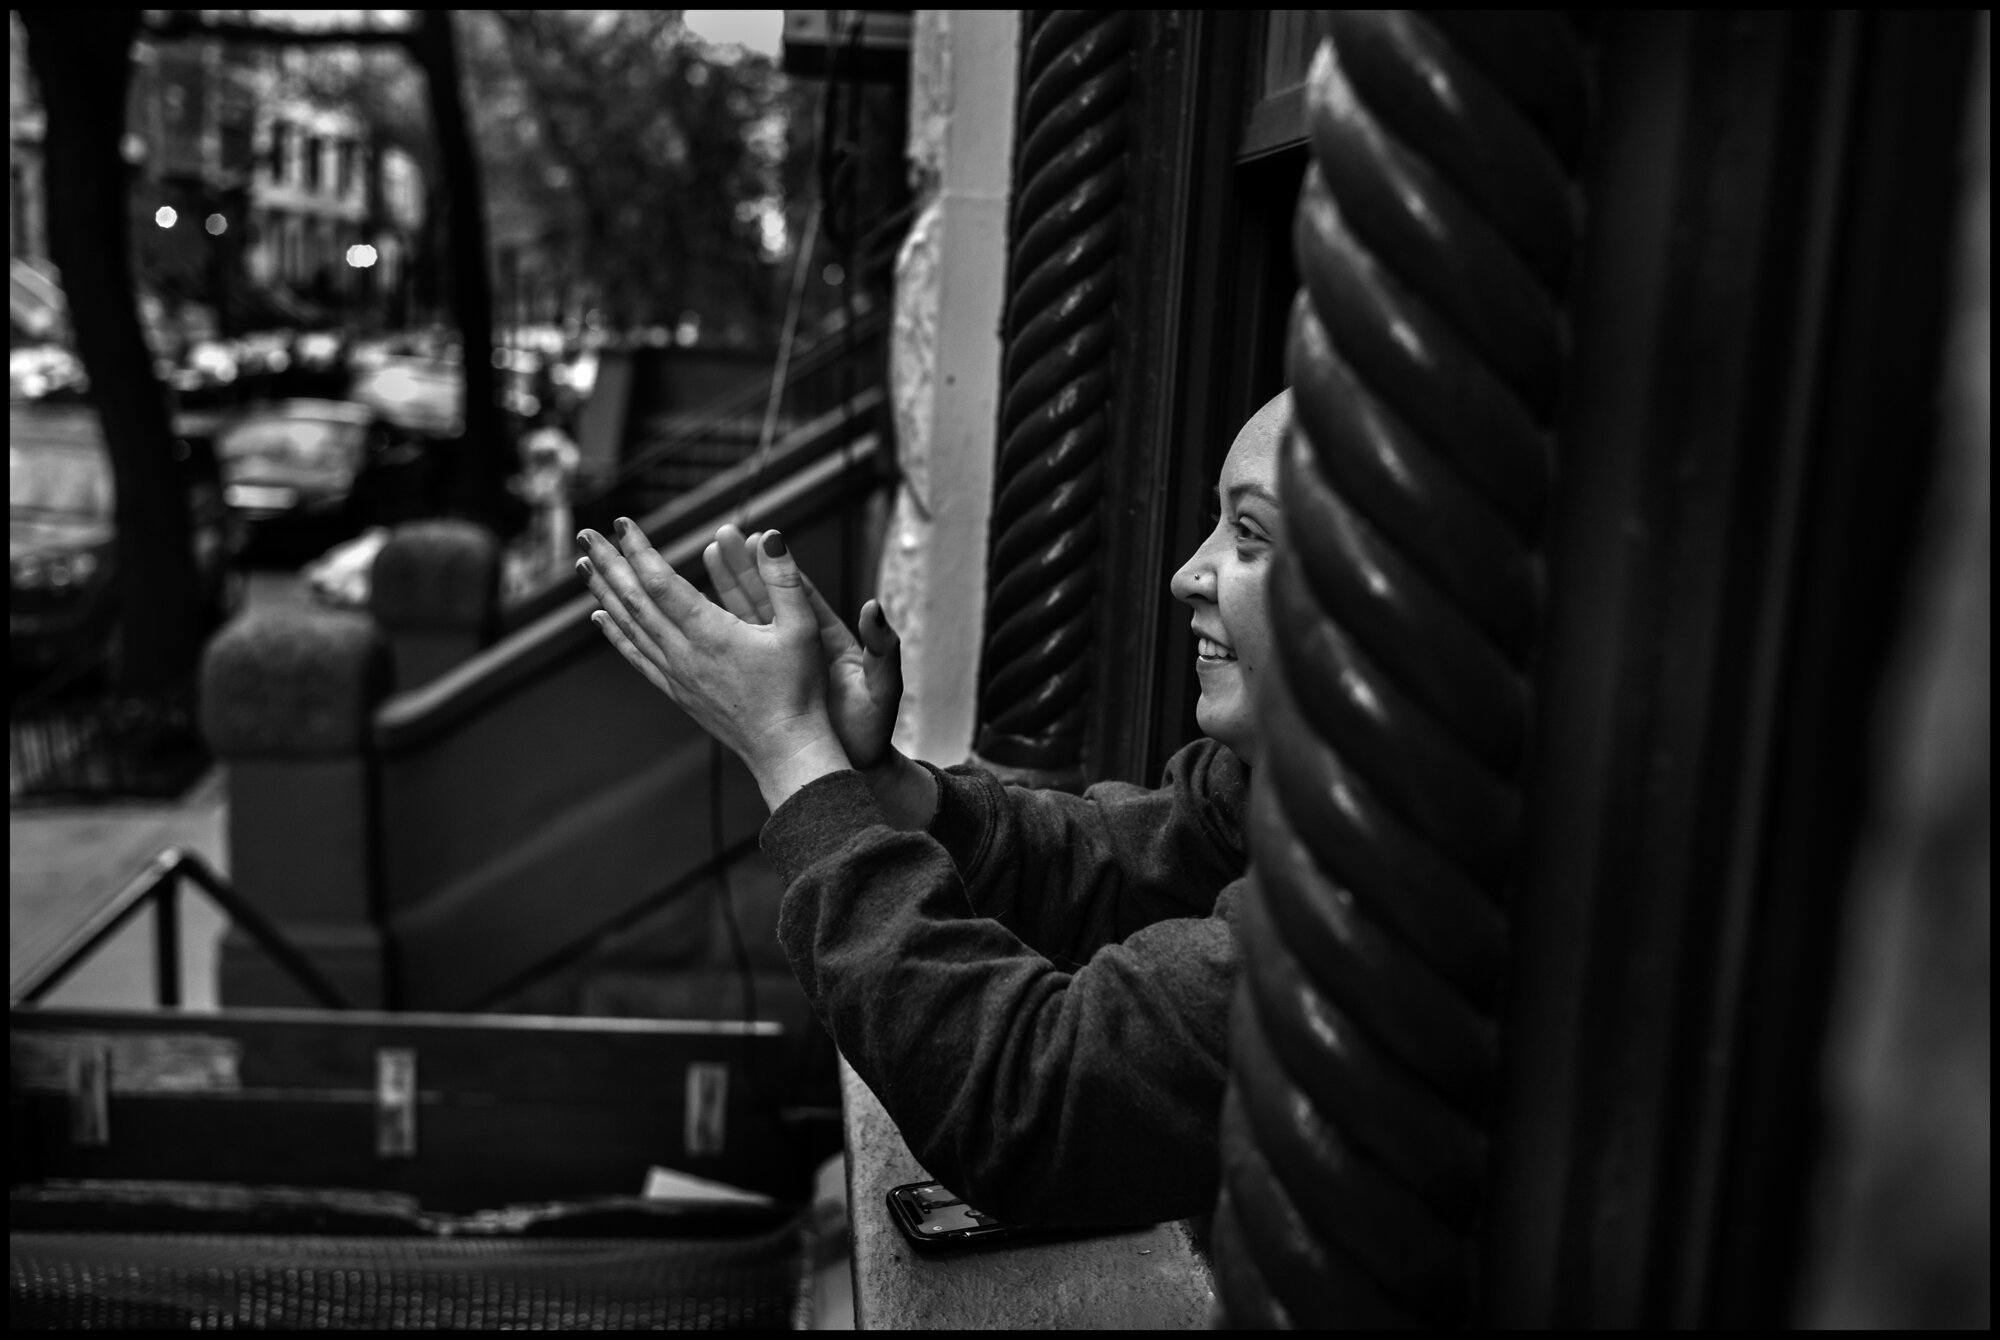  Jamie, a resident of the Upper Westside, claps and expresses her gratitude for all of the healthcare and essential workers. This takes place every evening at 7pm.   April 16, 2020. © Peter Turnley  ID# 22-002 